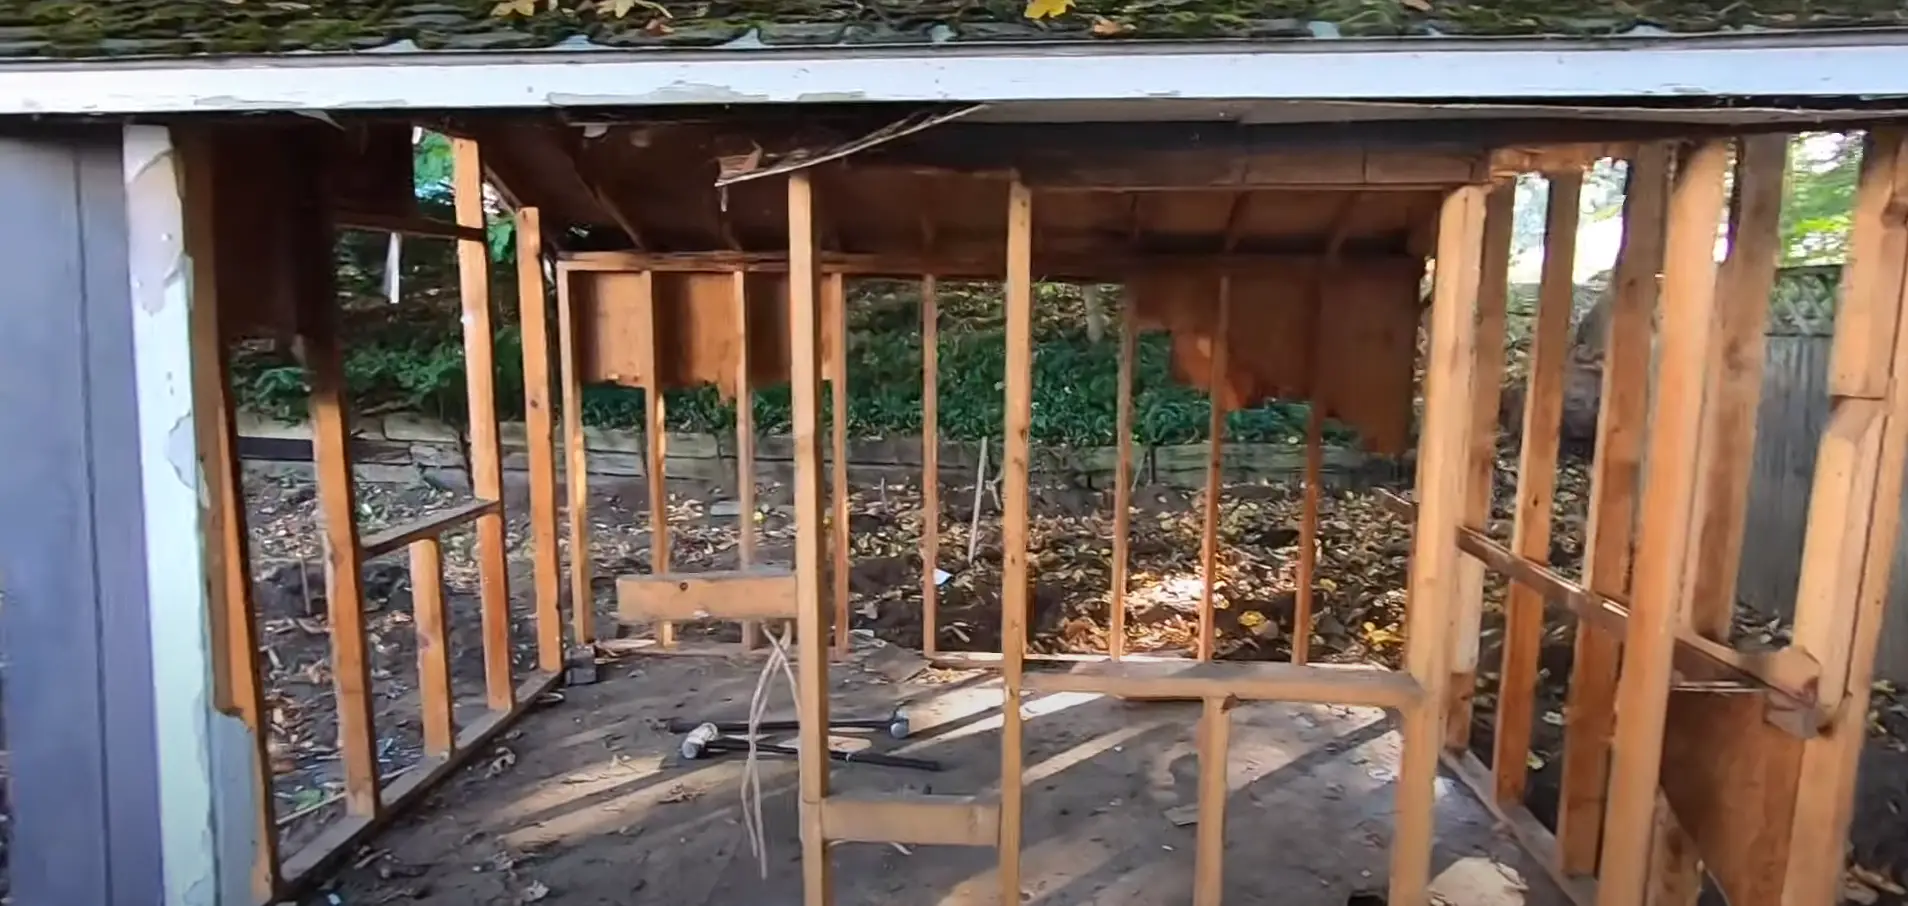 Is It Easy To Dismantle A Shed?